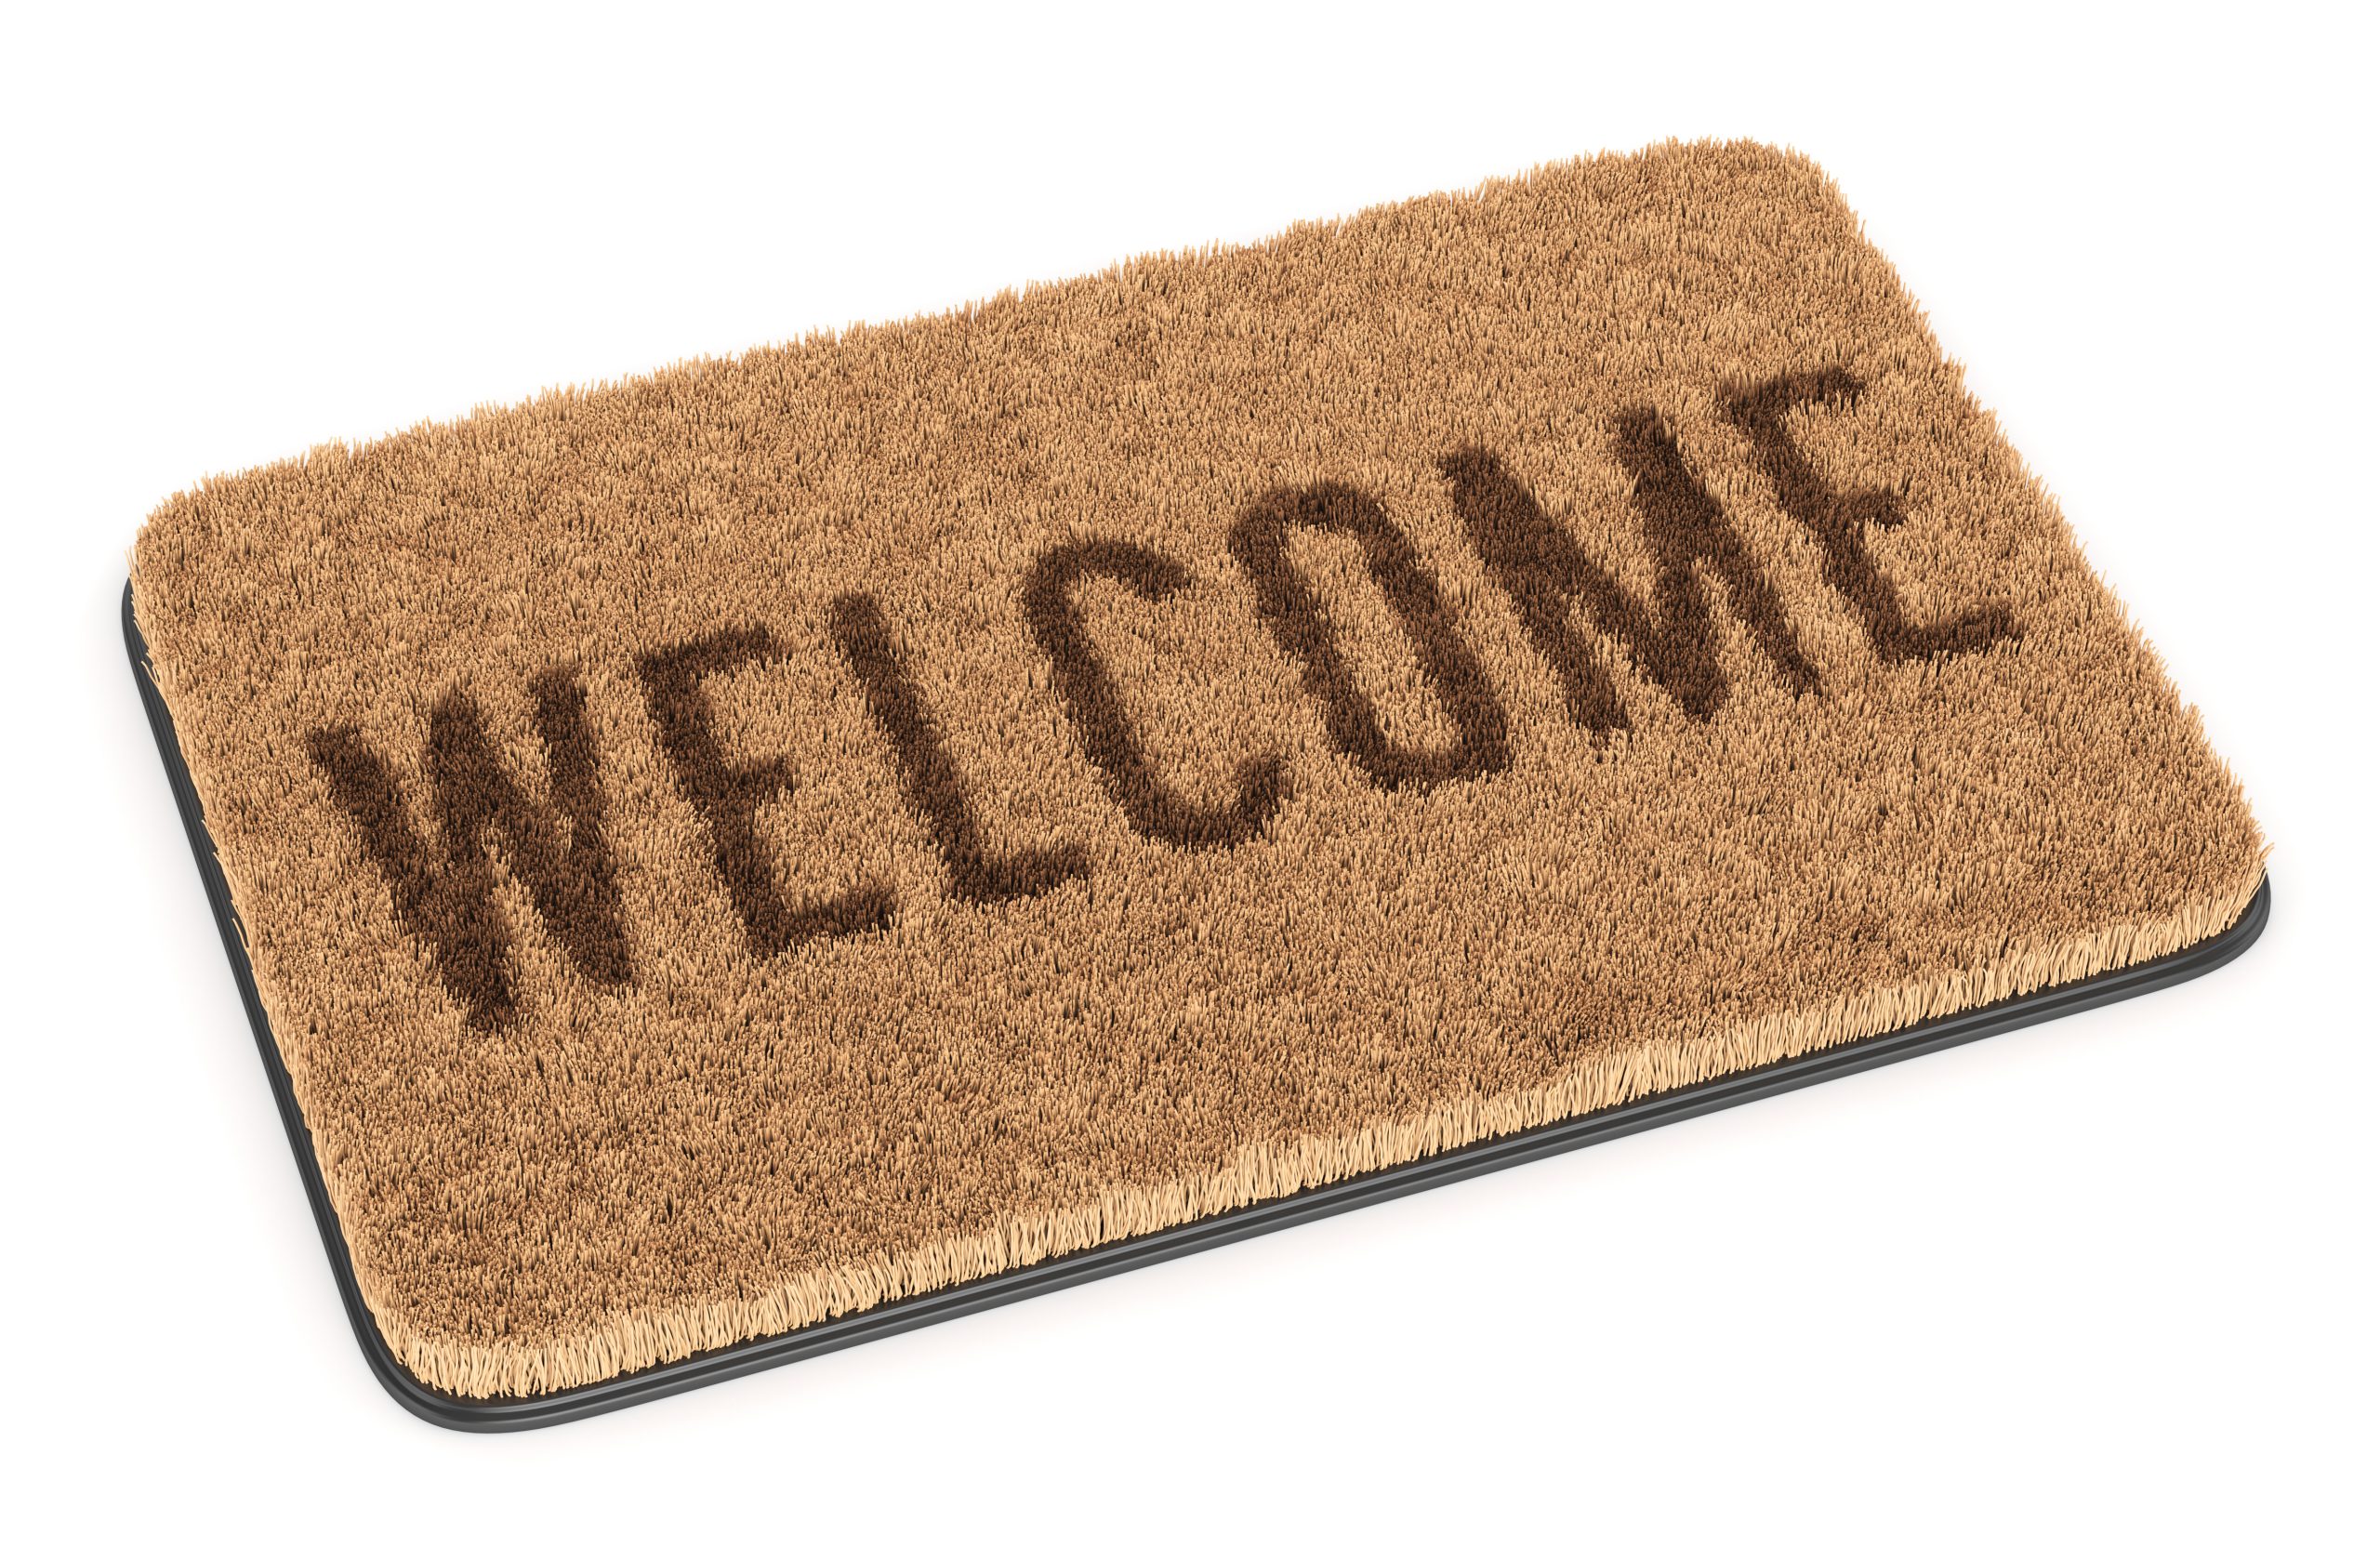 Brown welcome coir doormat isolated on white